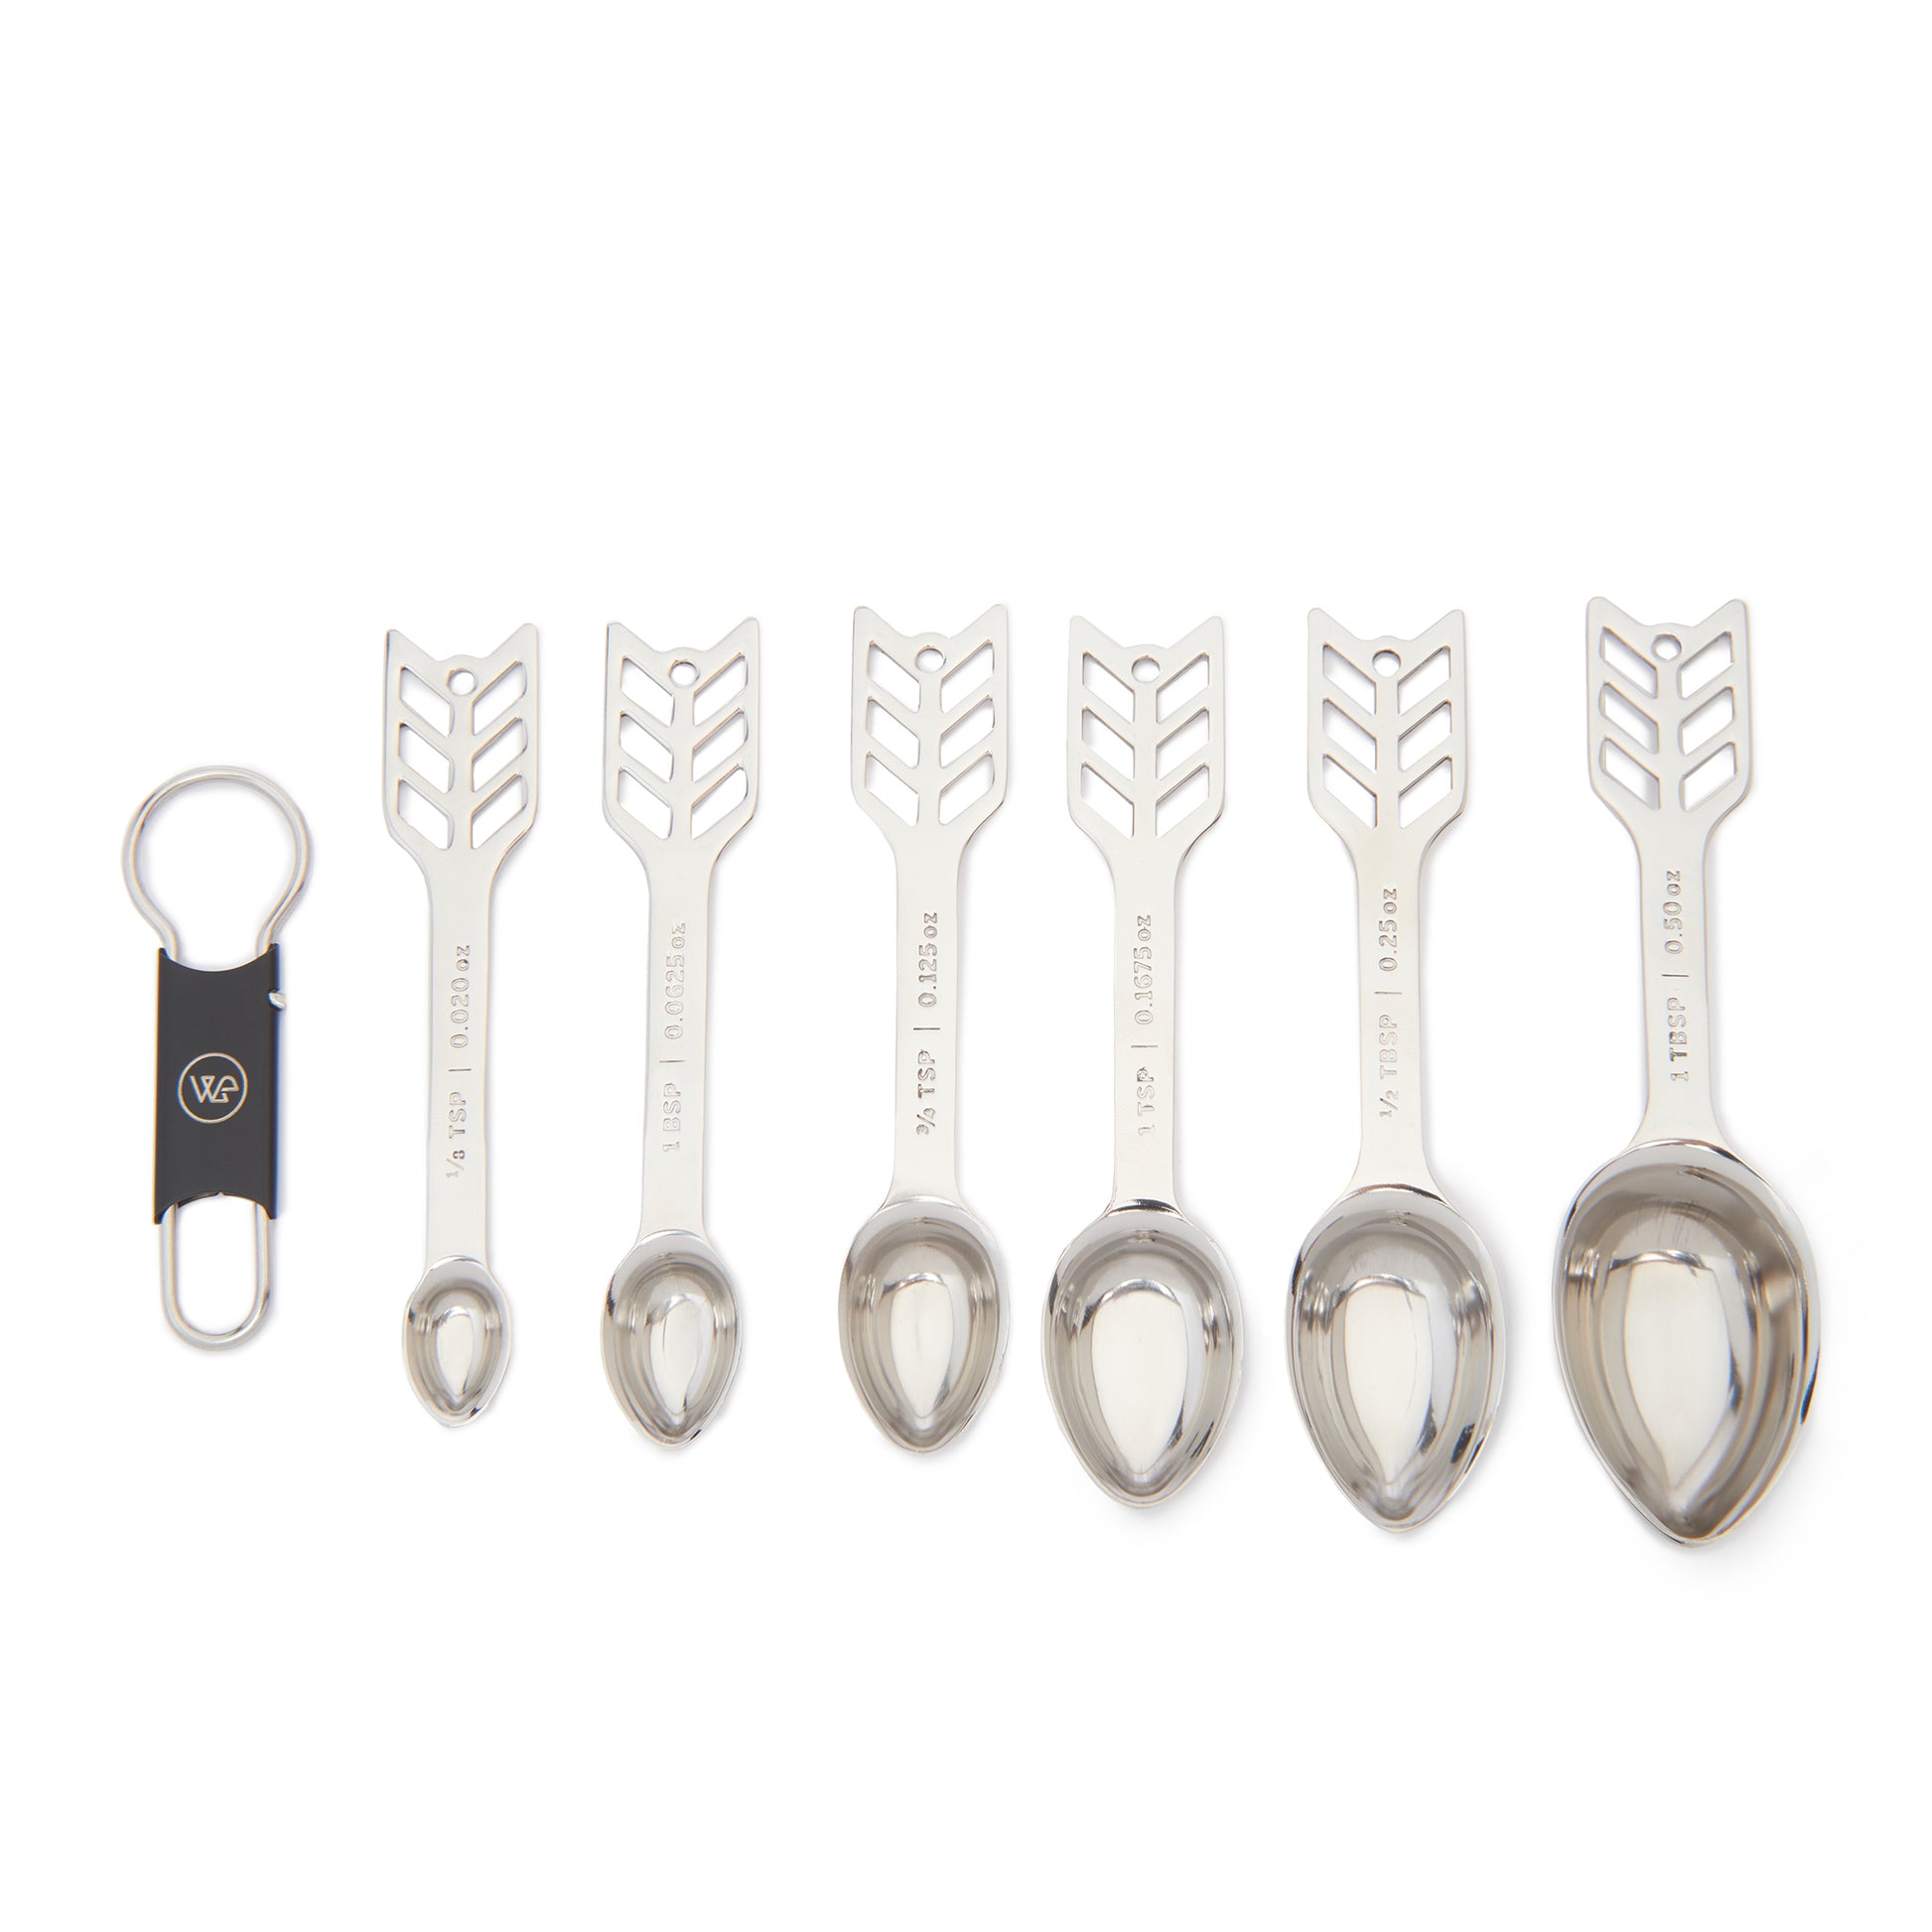 MEEHAN’S MIXOLOGY SPOONS / STAINLESS STEEL